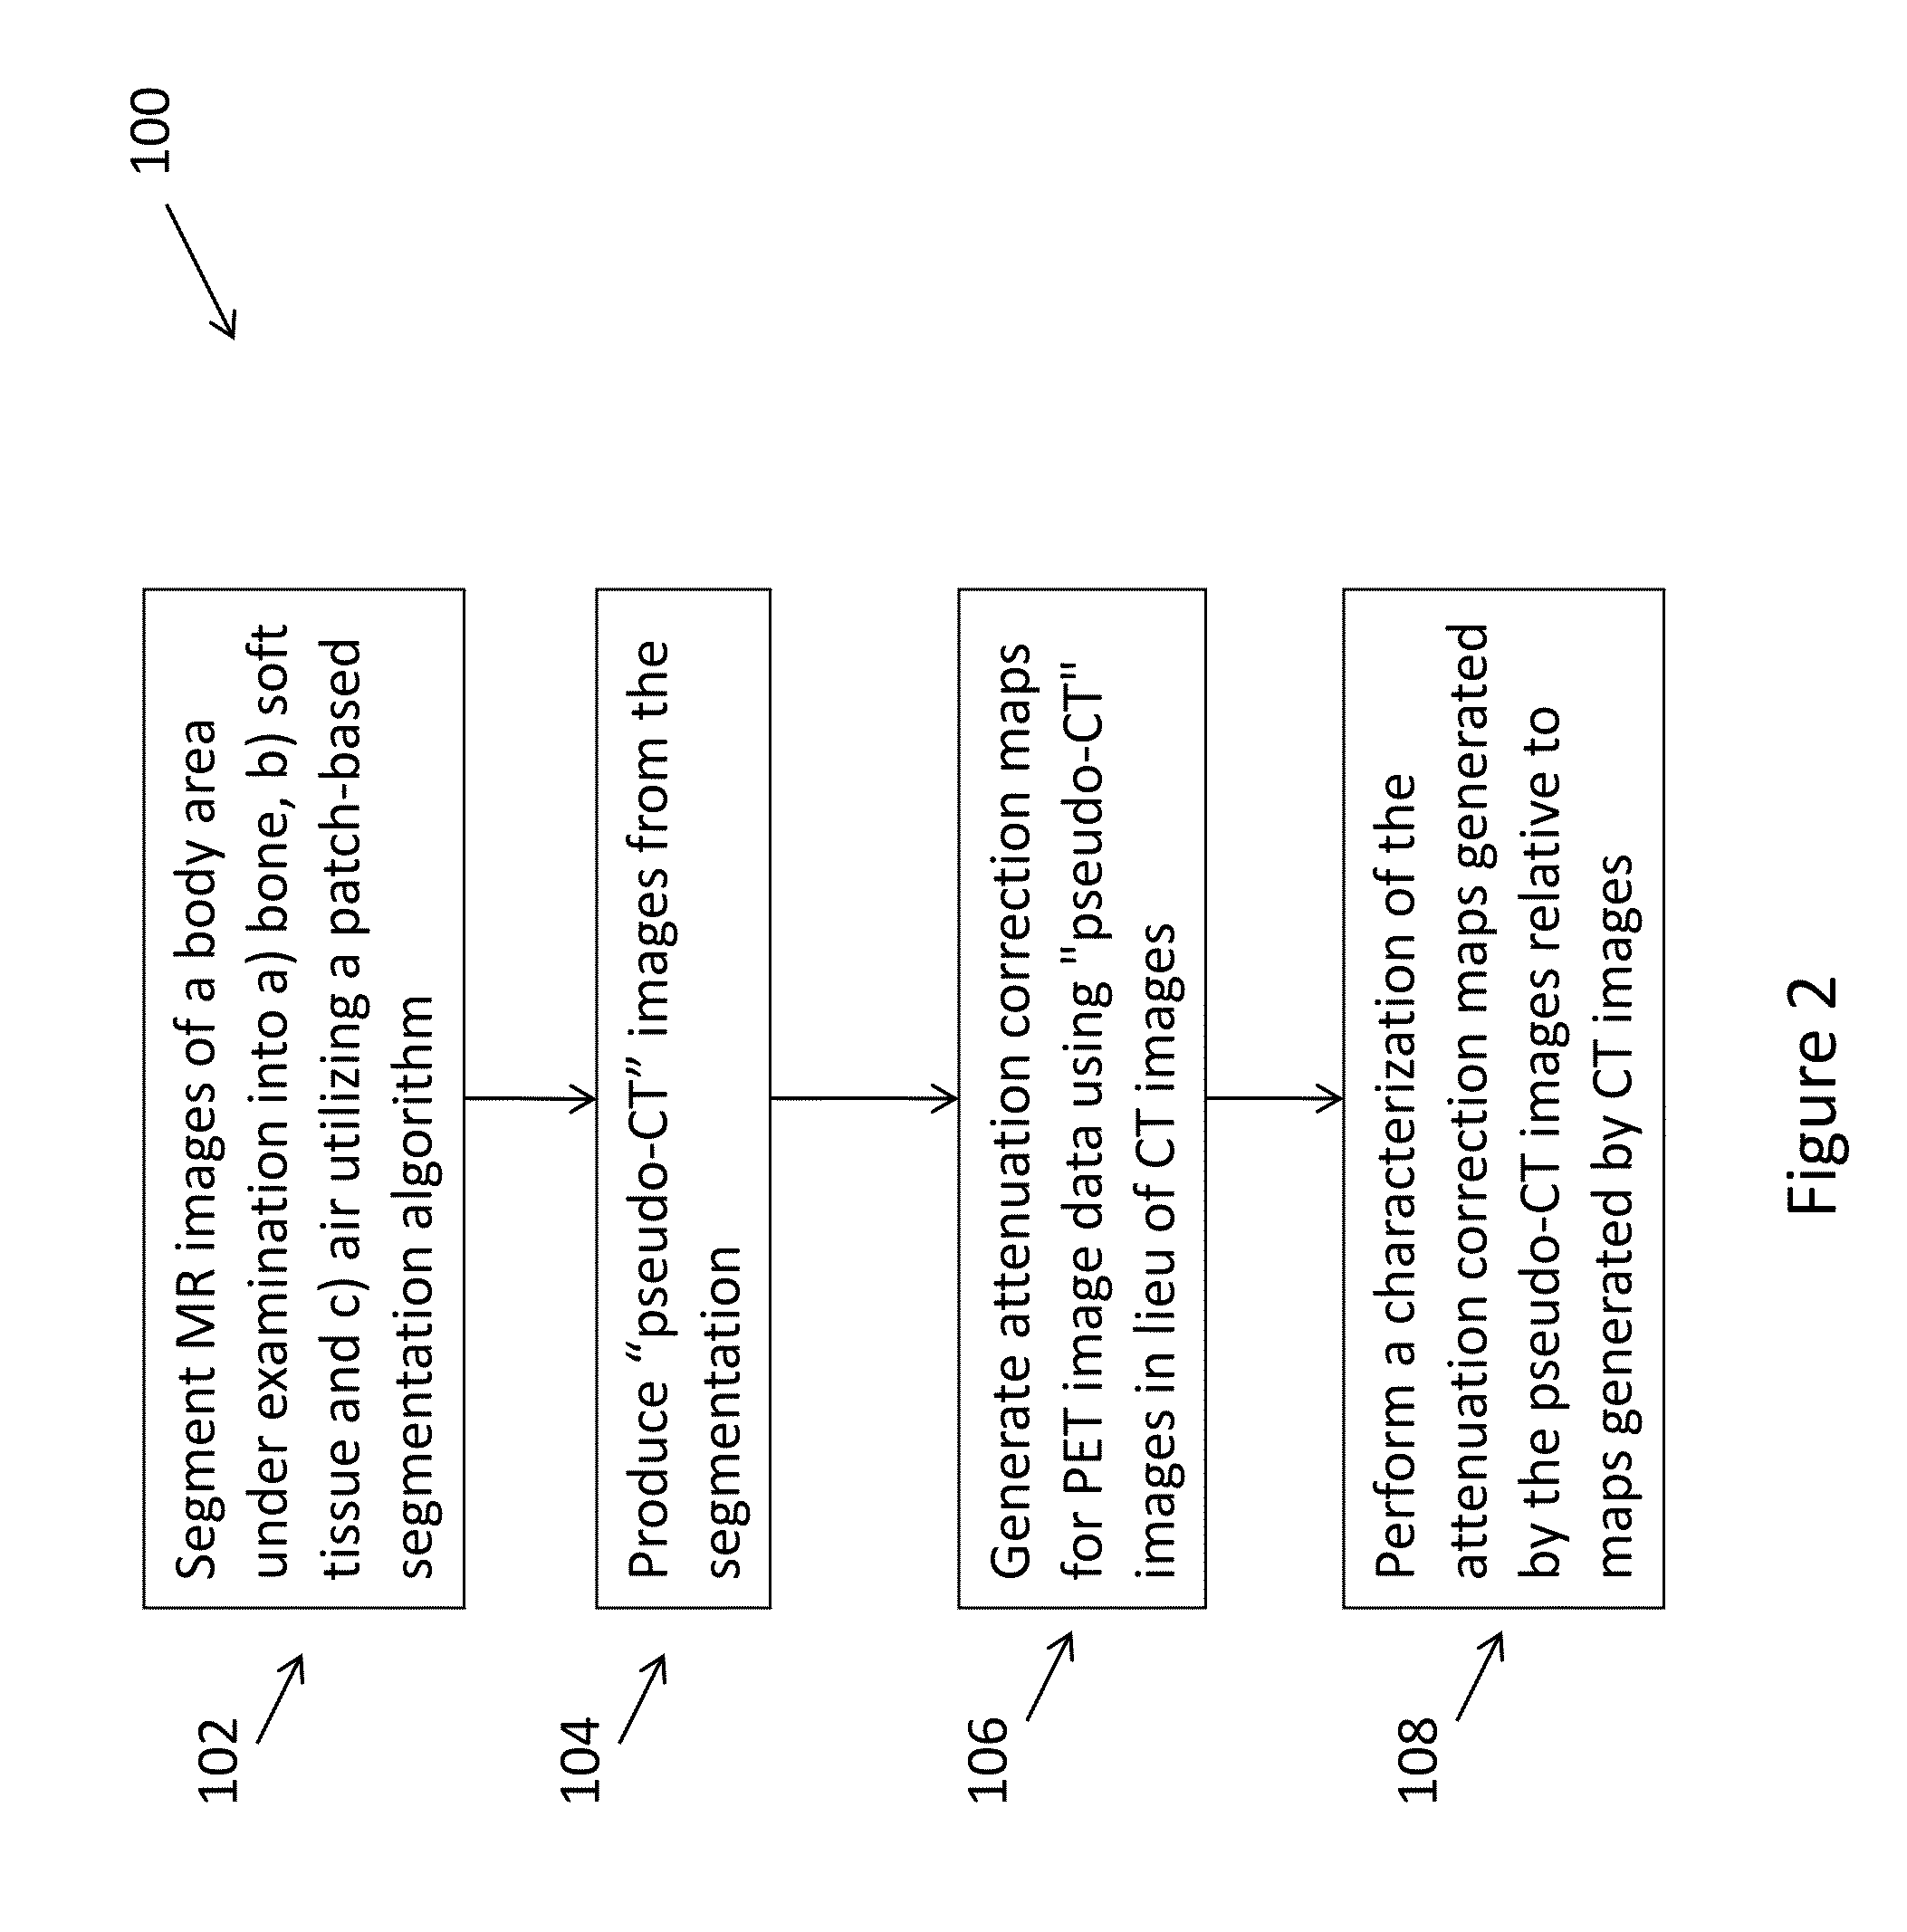 Method for creating attenuation correction maps for pet image reconstruction